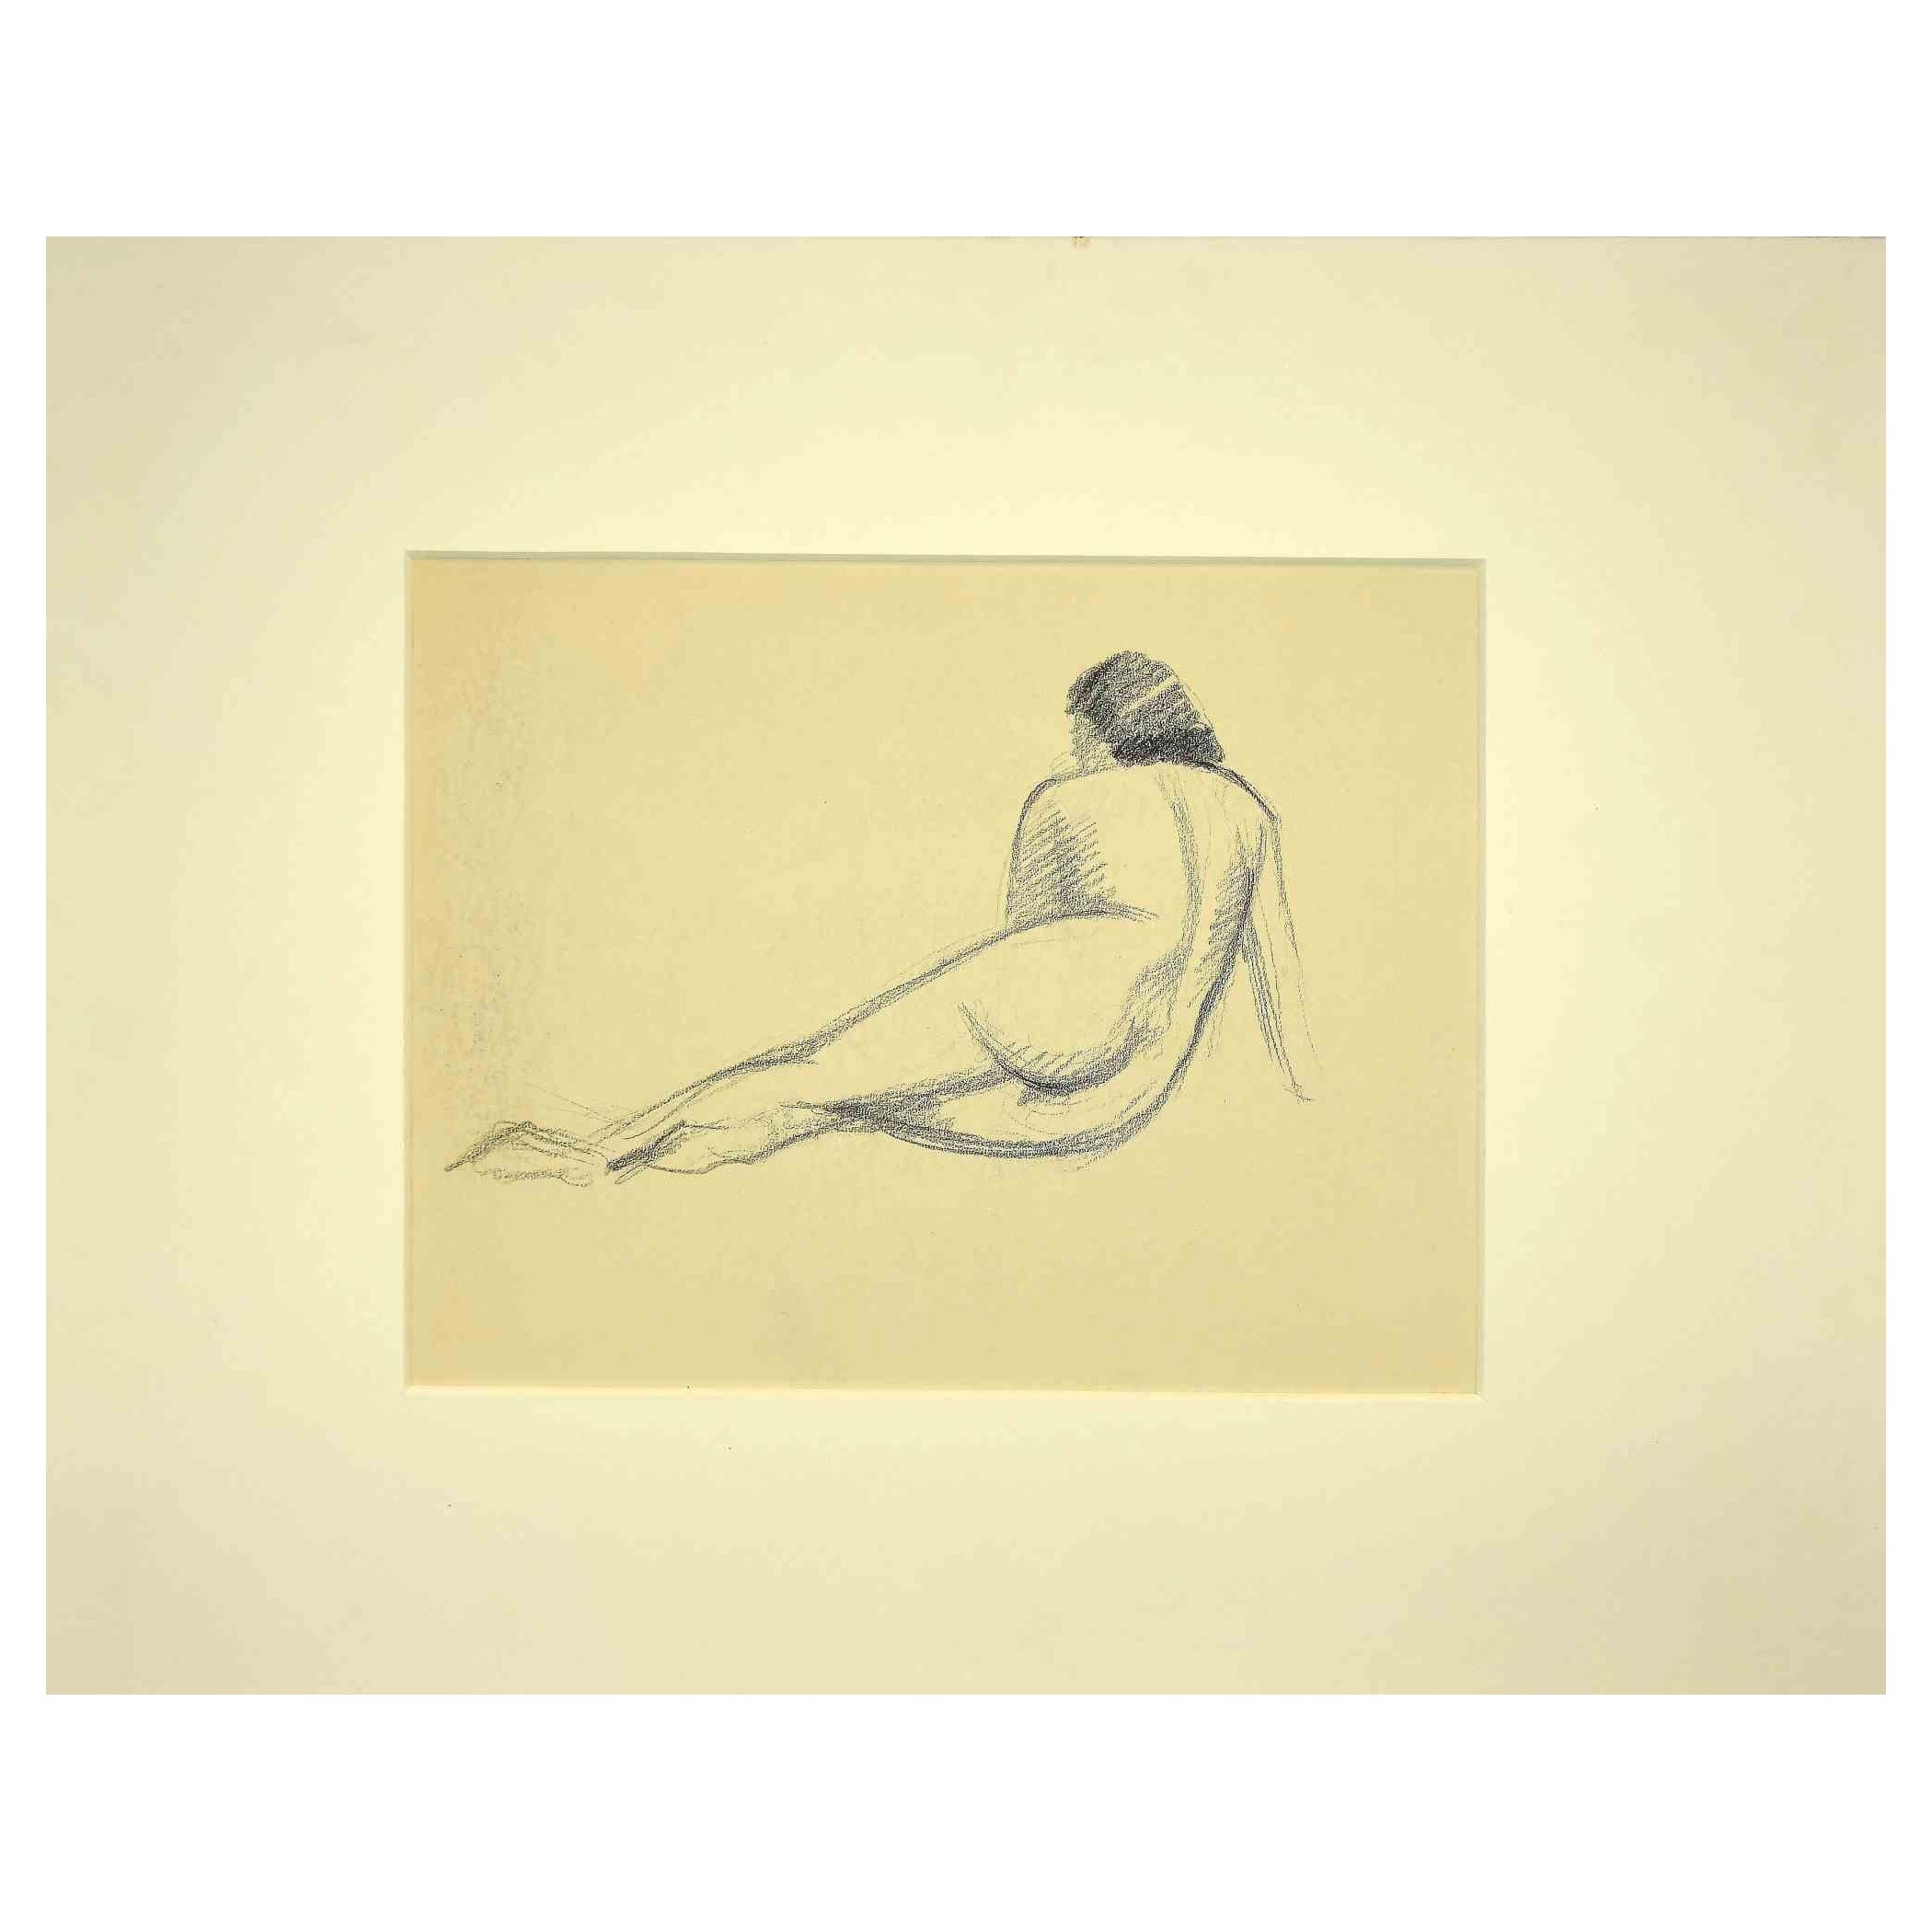 Paul Garin Figurative Art - Nude from the Back - Pencil Drawing - Mid-20th Century